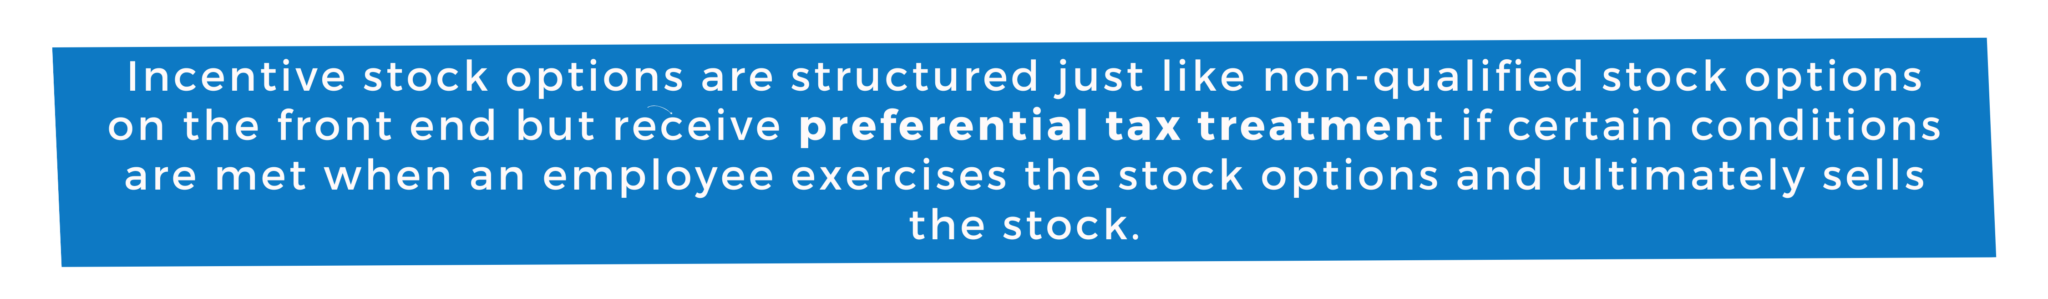 Incentive stock options are structured just like non-qualified stock options on the front end but receive preferential tax treatment if certain conditions are met when an employee exercises the stock options and ultimately sells the stock.